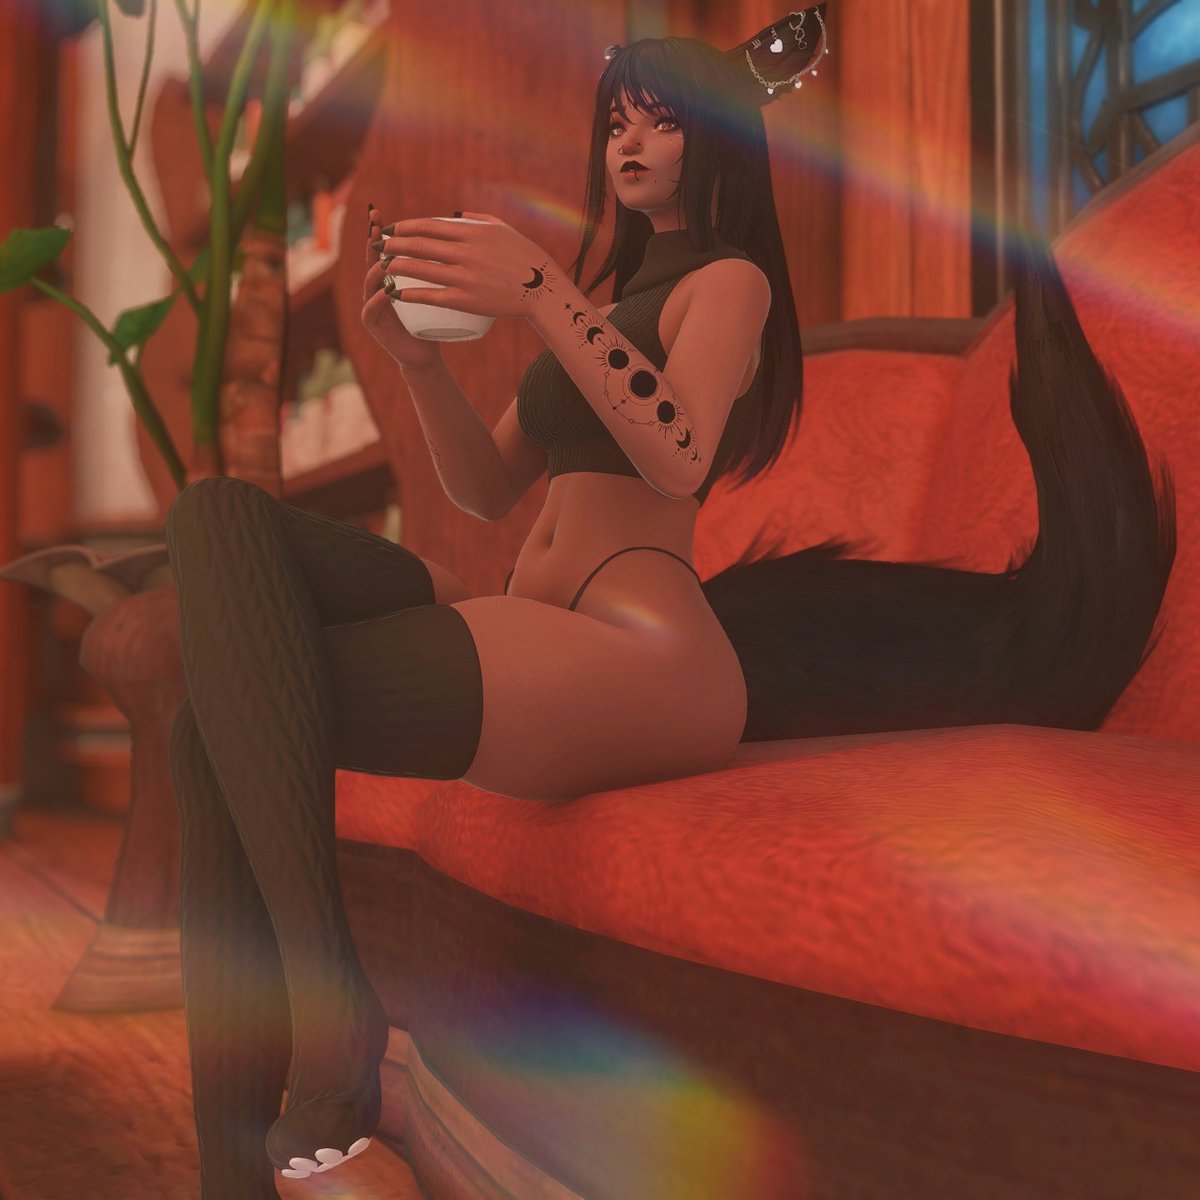 Stay awhile~

#gposers // #miqote // #pompommods // #daddysmods //